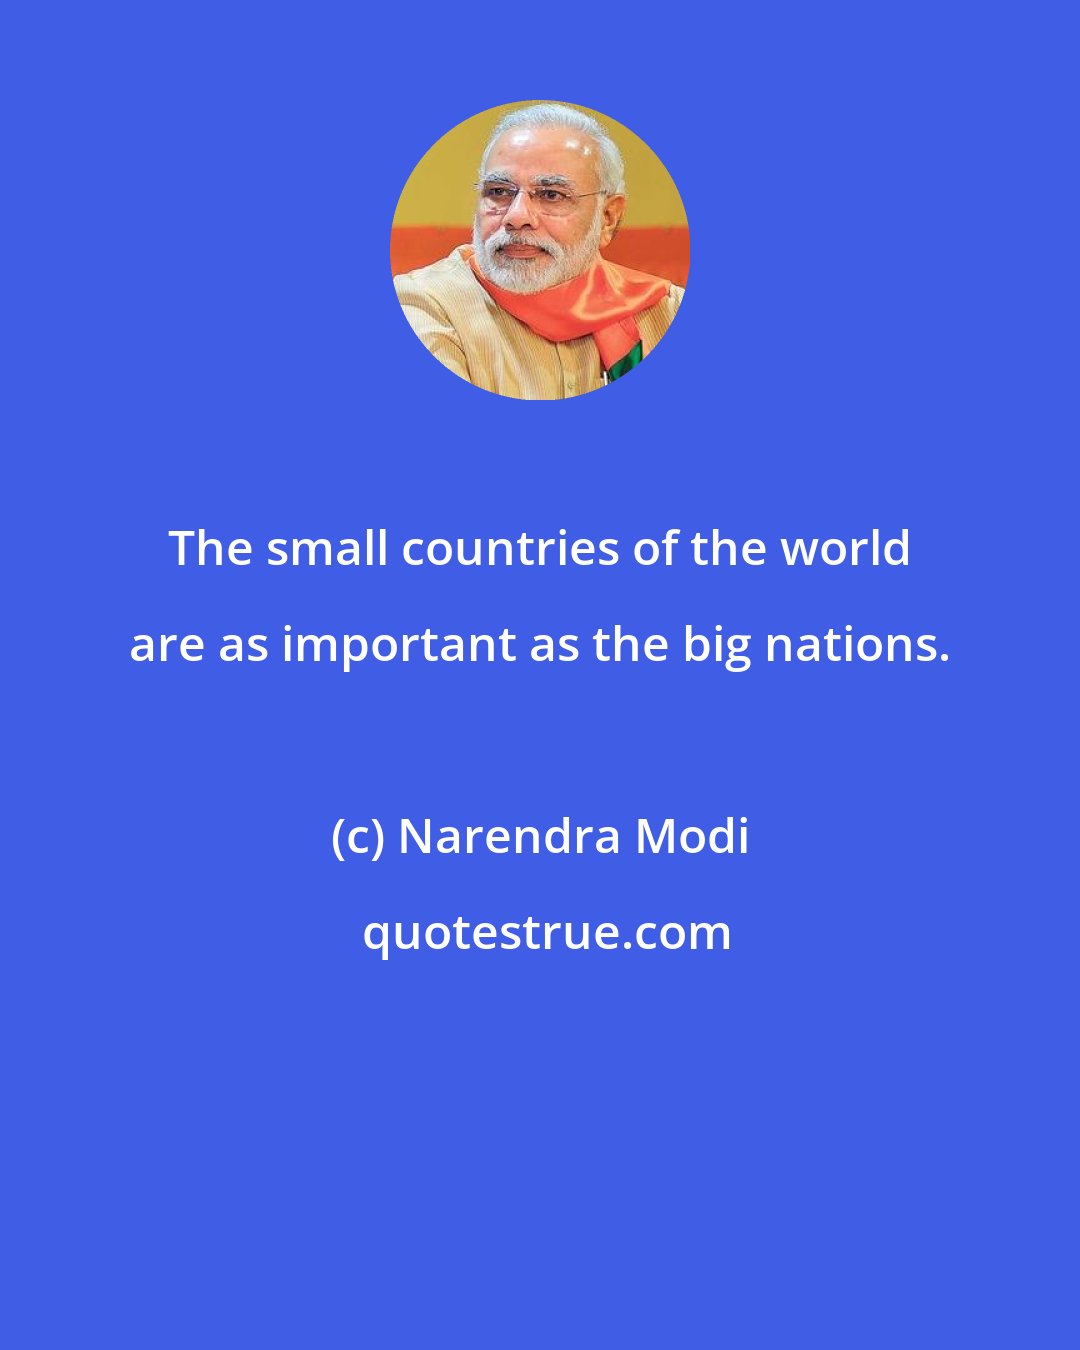 Narendra Modi: The small countries of the world are as important as the big nations.